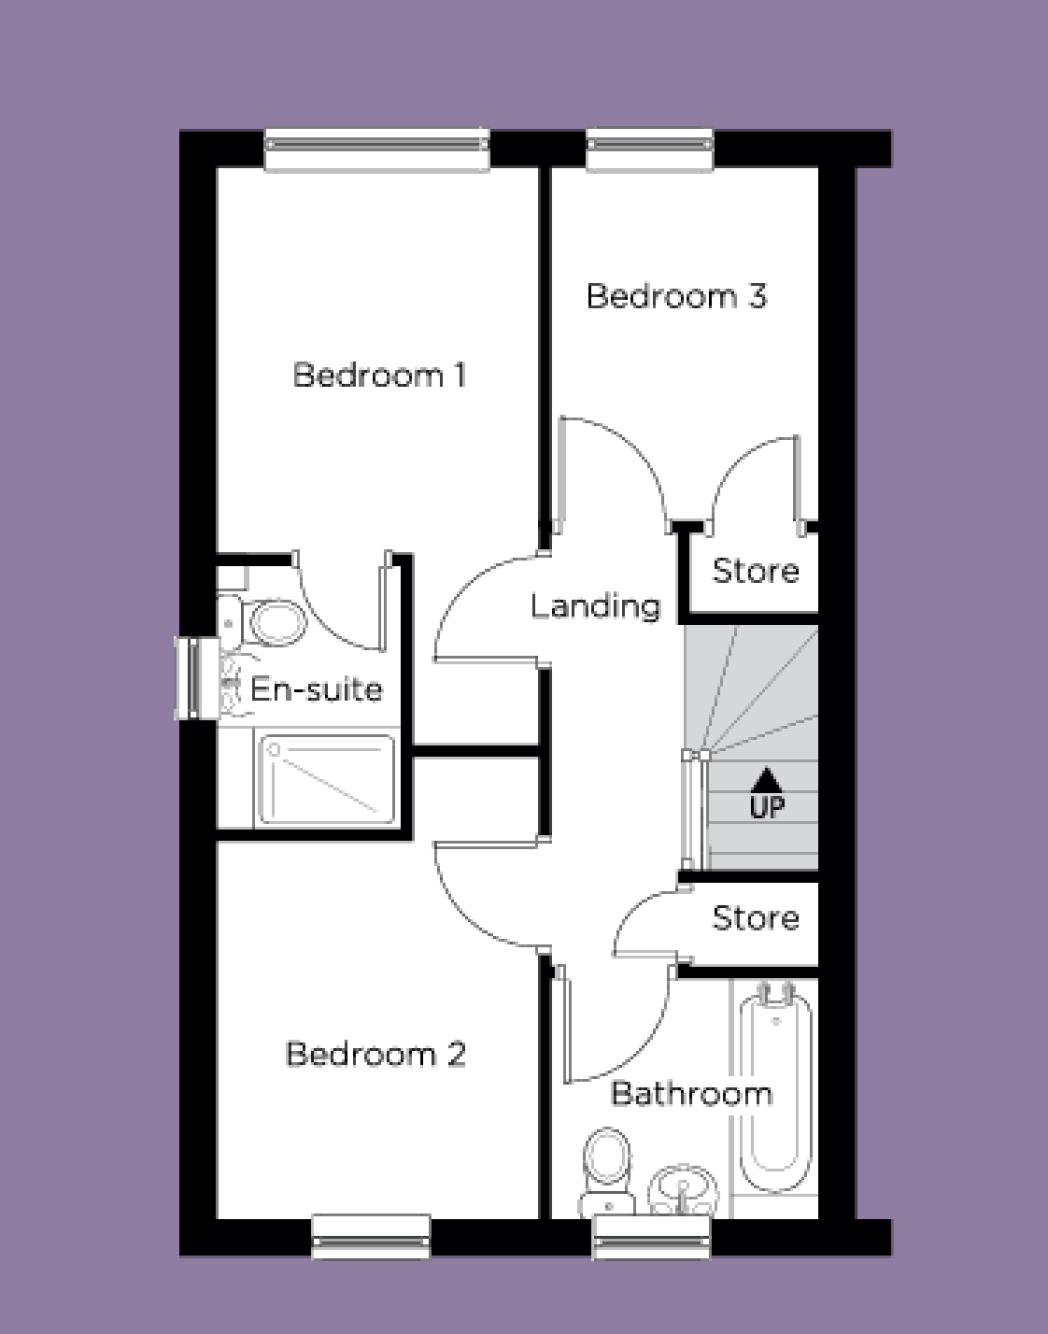 First Floor Plan of The Magnolia